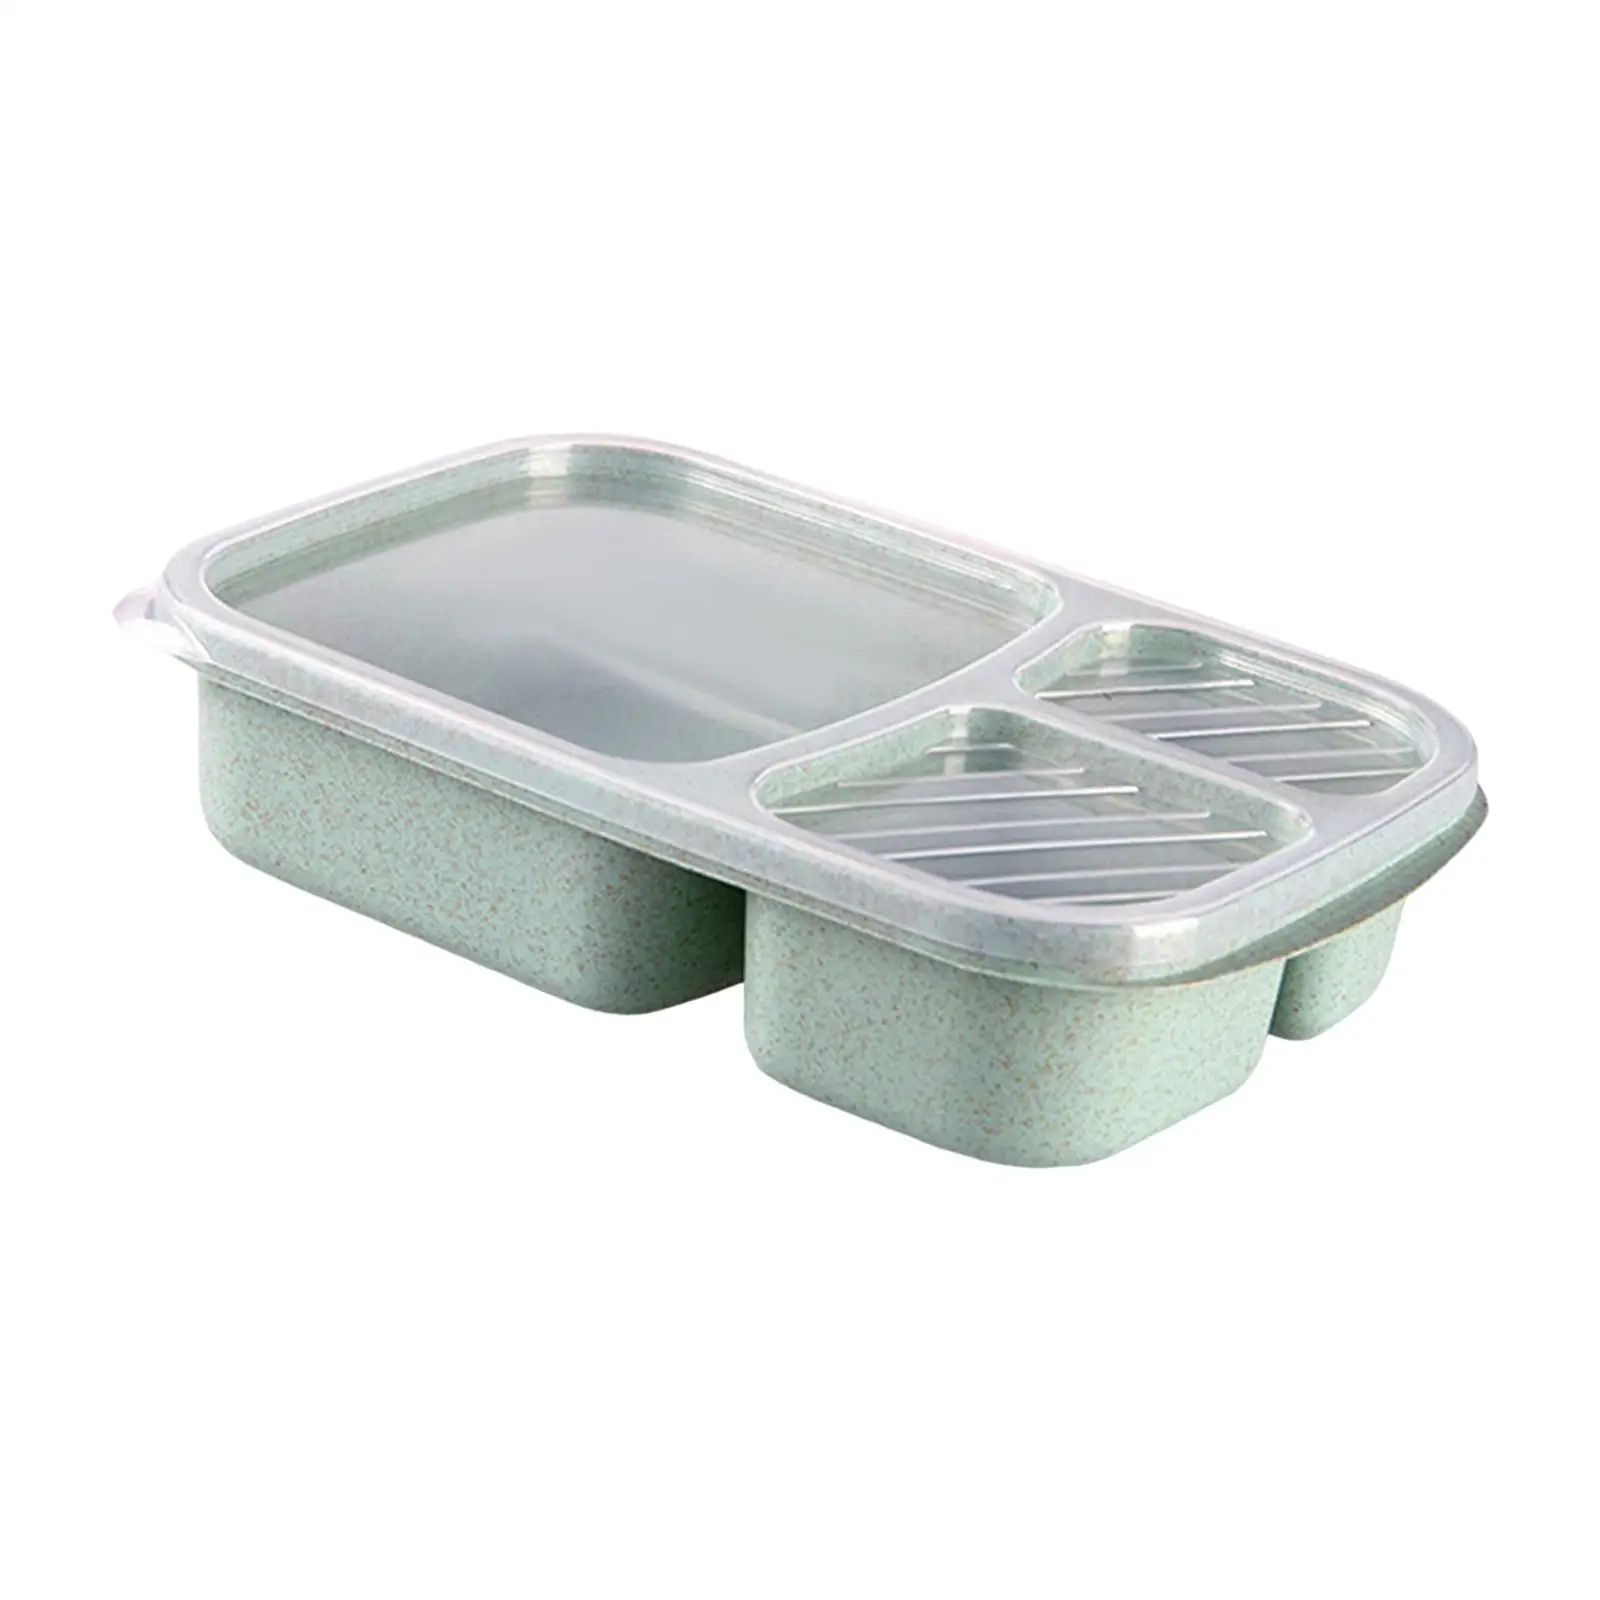 Airtight Microwave Bento Picnic Divided Compartments Leakproof Wheat Fiber PP bento boxes for Children Teen Adults School